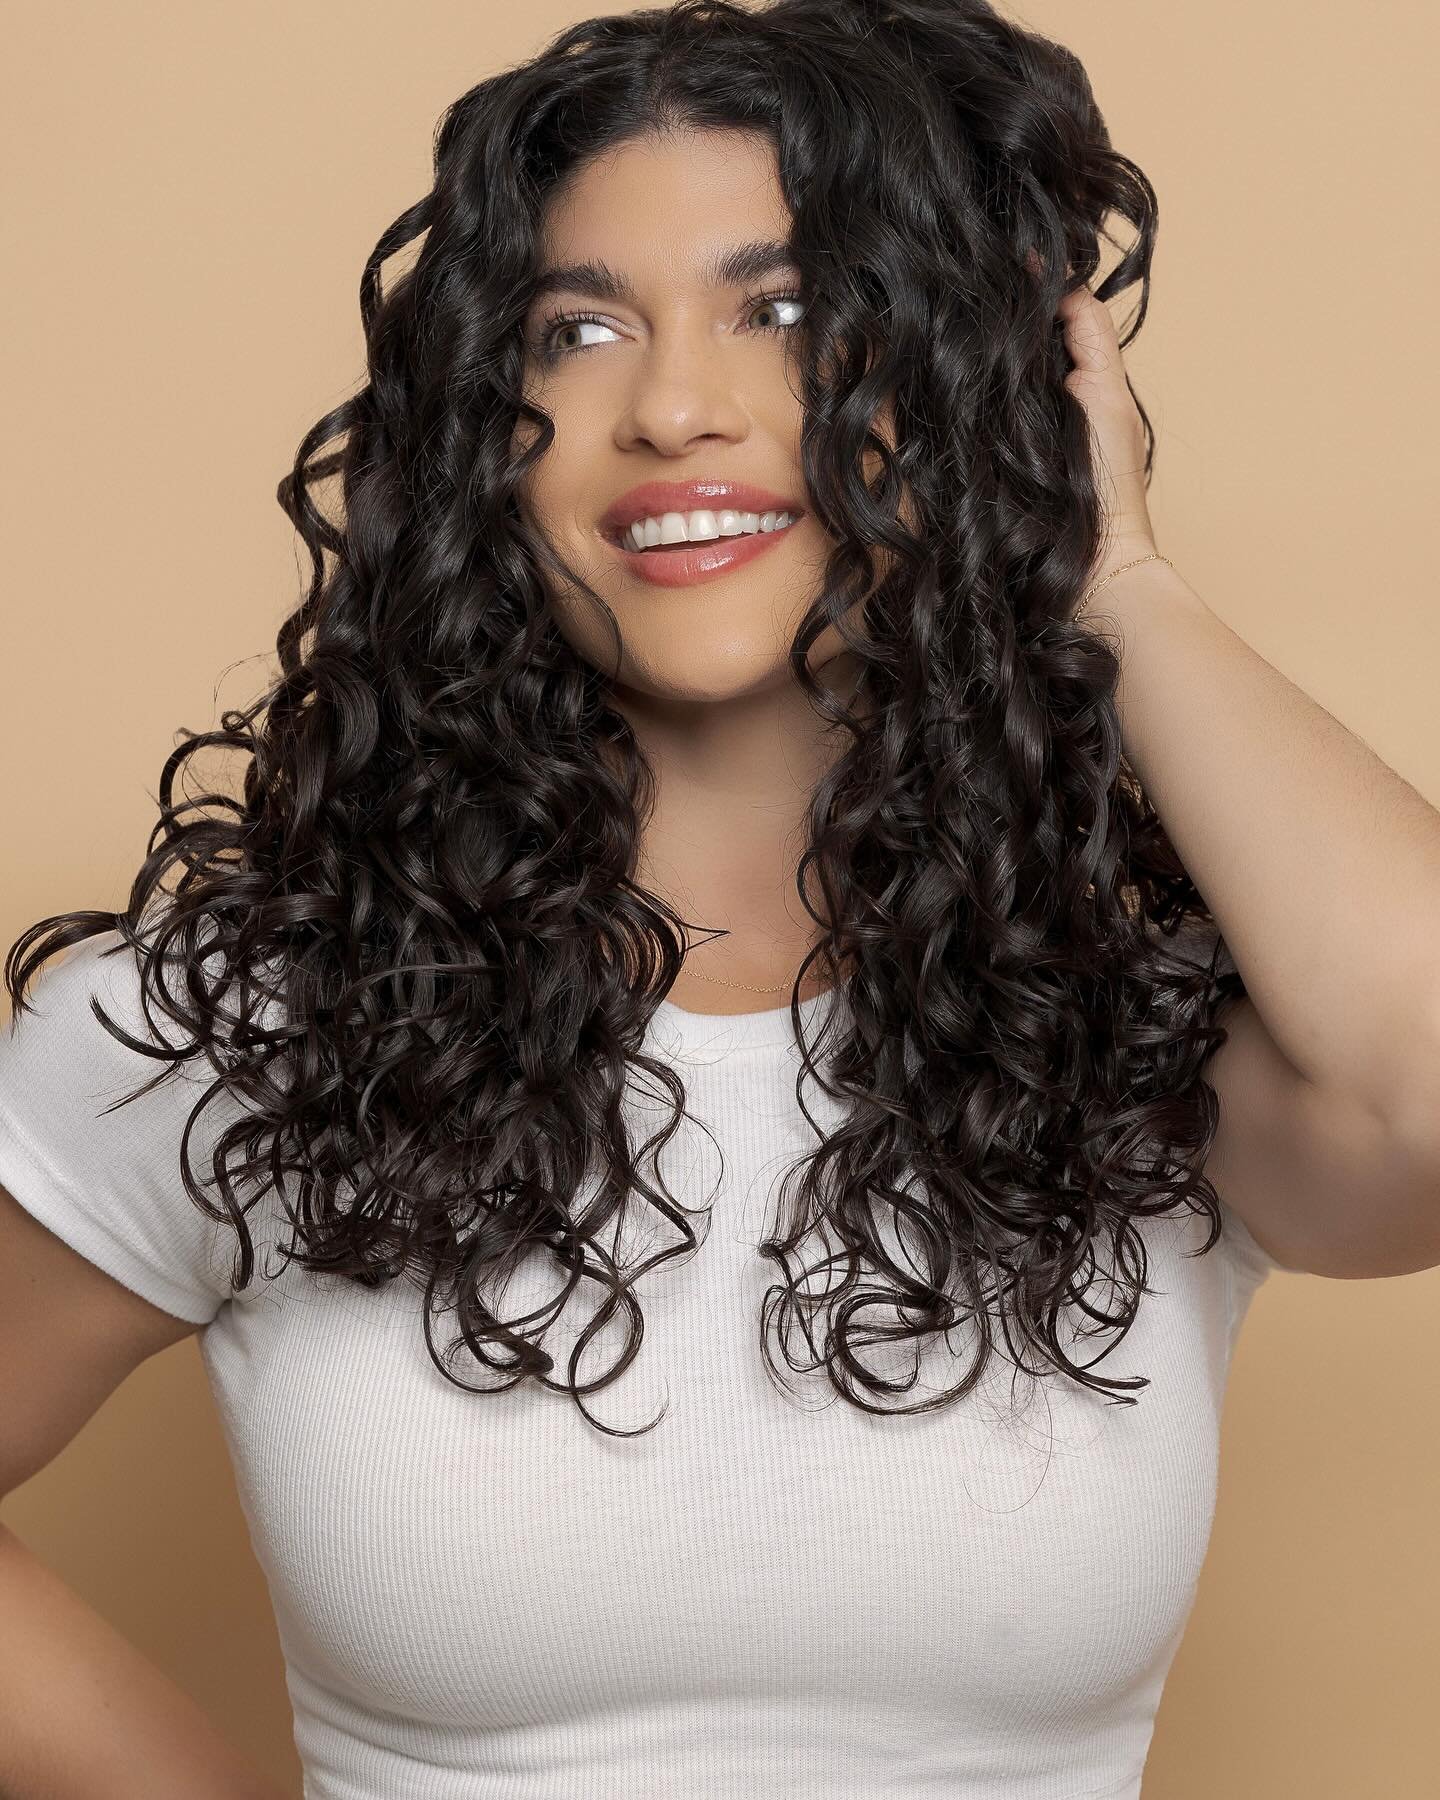 Today years old when I realized my hair was this curly🫢😍 Thank Jesus for @bouncecurl 👏🏼👩🏻&zwj;🦱 (women owned &amp; an Arizona local biz) 

Link in my bio for my MUST-HAVE products! 

&bull;
&bull;
&bull;
&bull;
&bull;
#bouncecurl #bouncecurlli